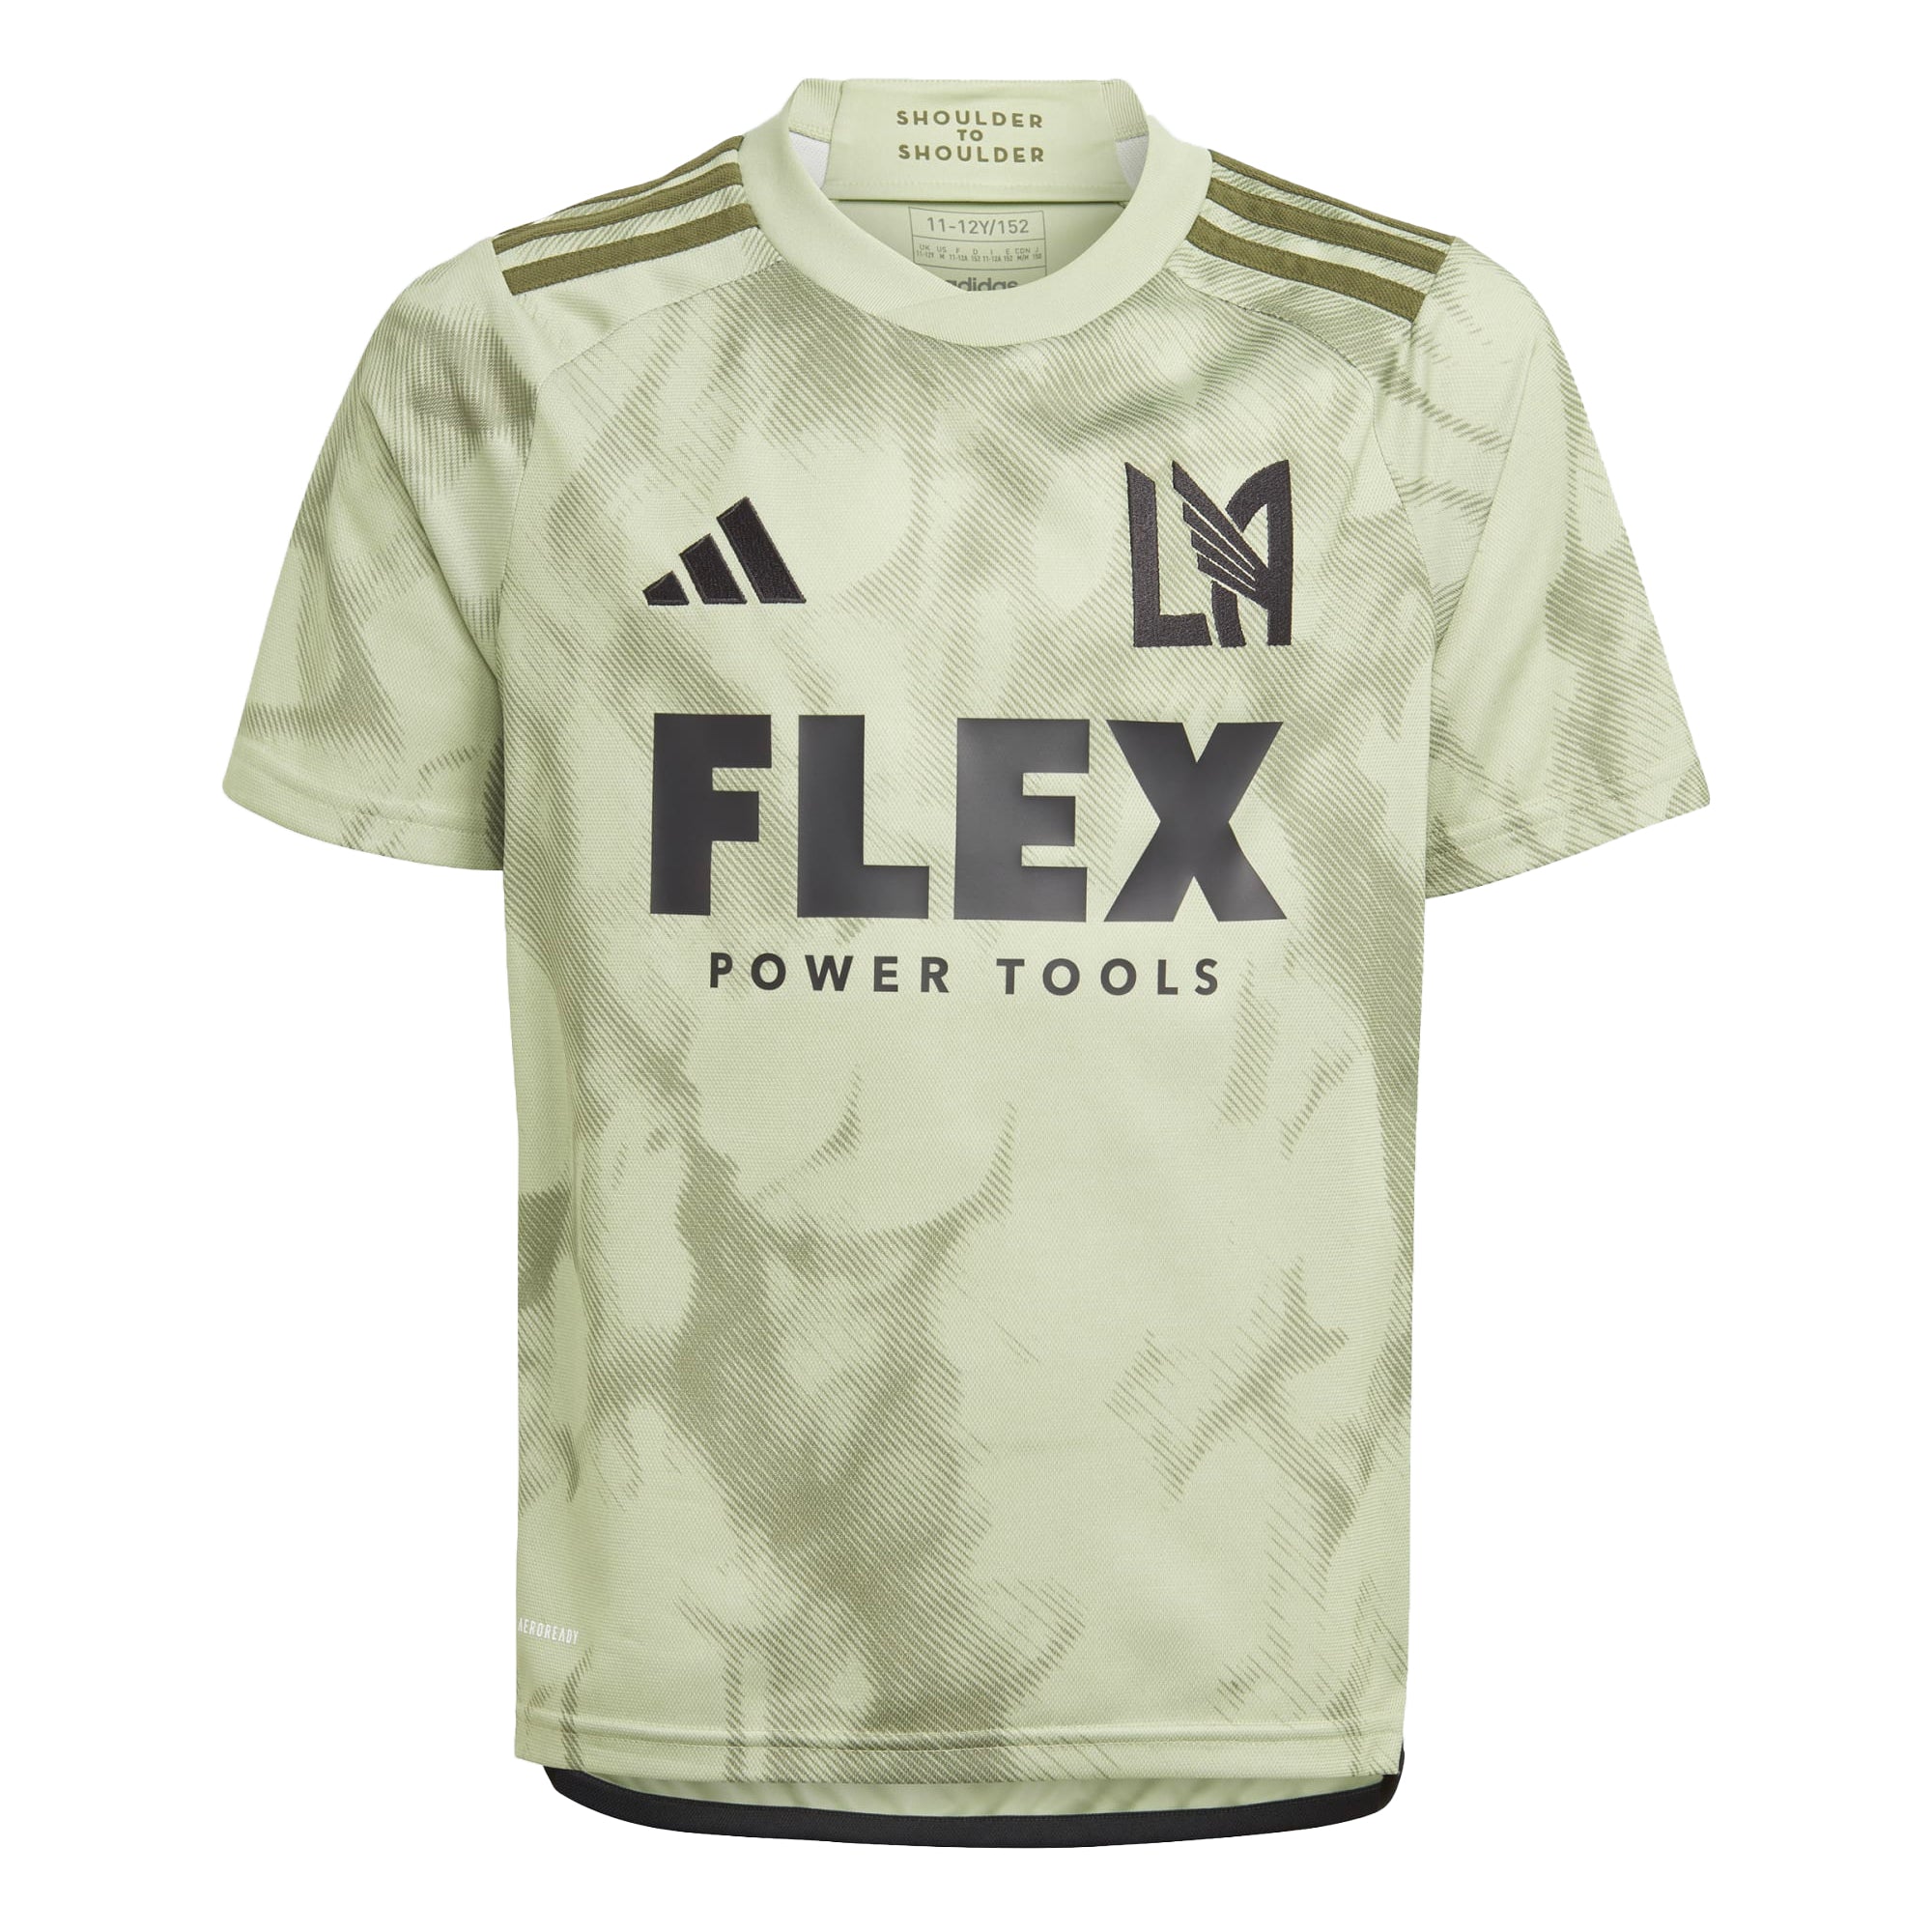 adidas LAFC AWAY AUTHENTIC JERSEY 2021